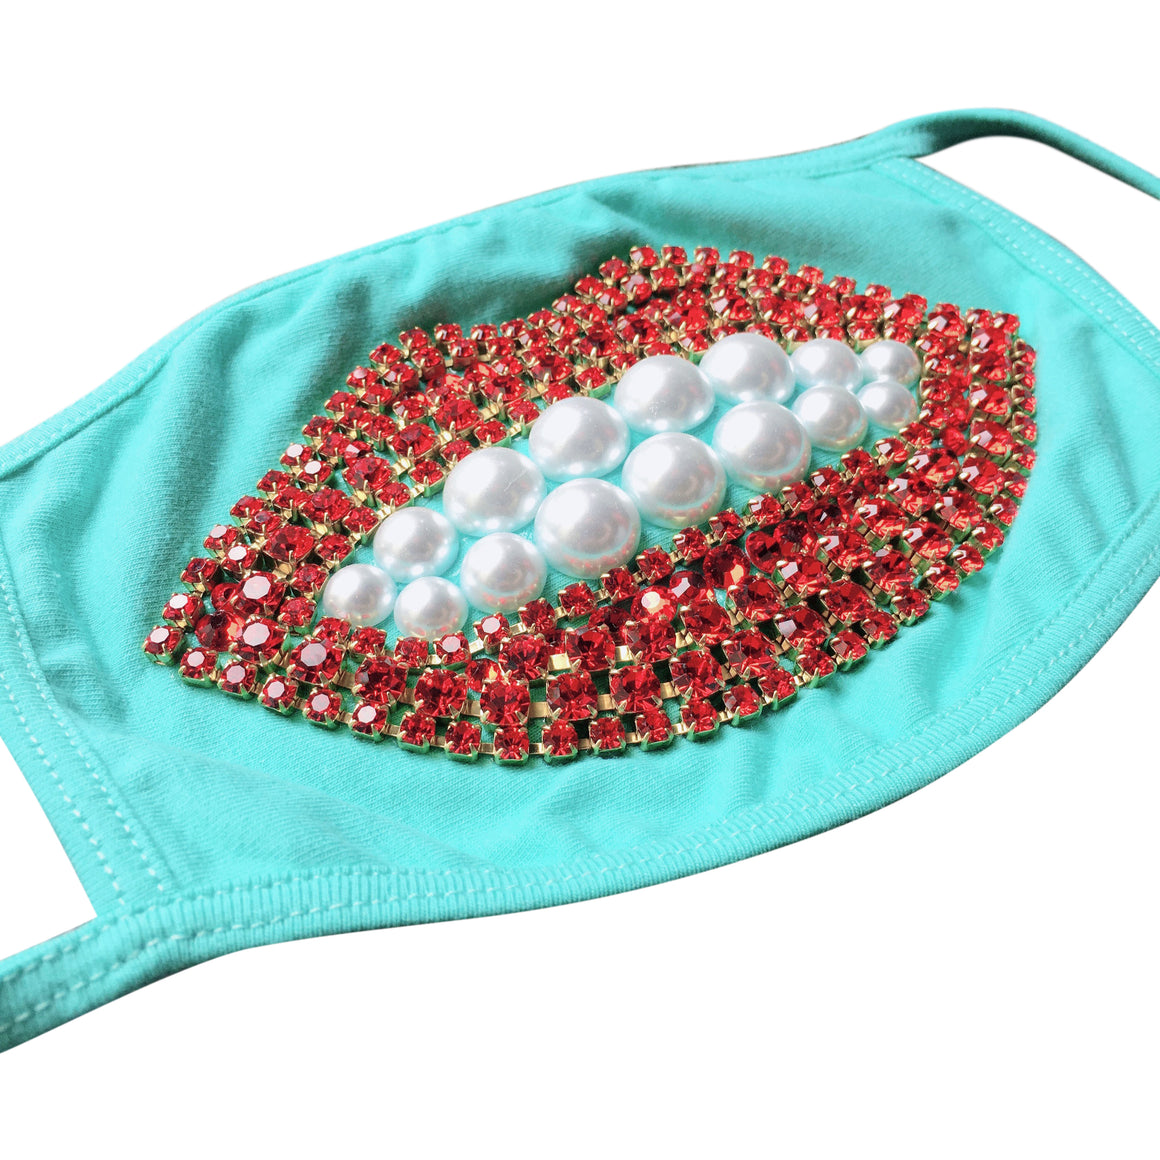 Surreal Crystal And Pearl Lip Mask - Turquoise